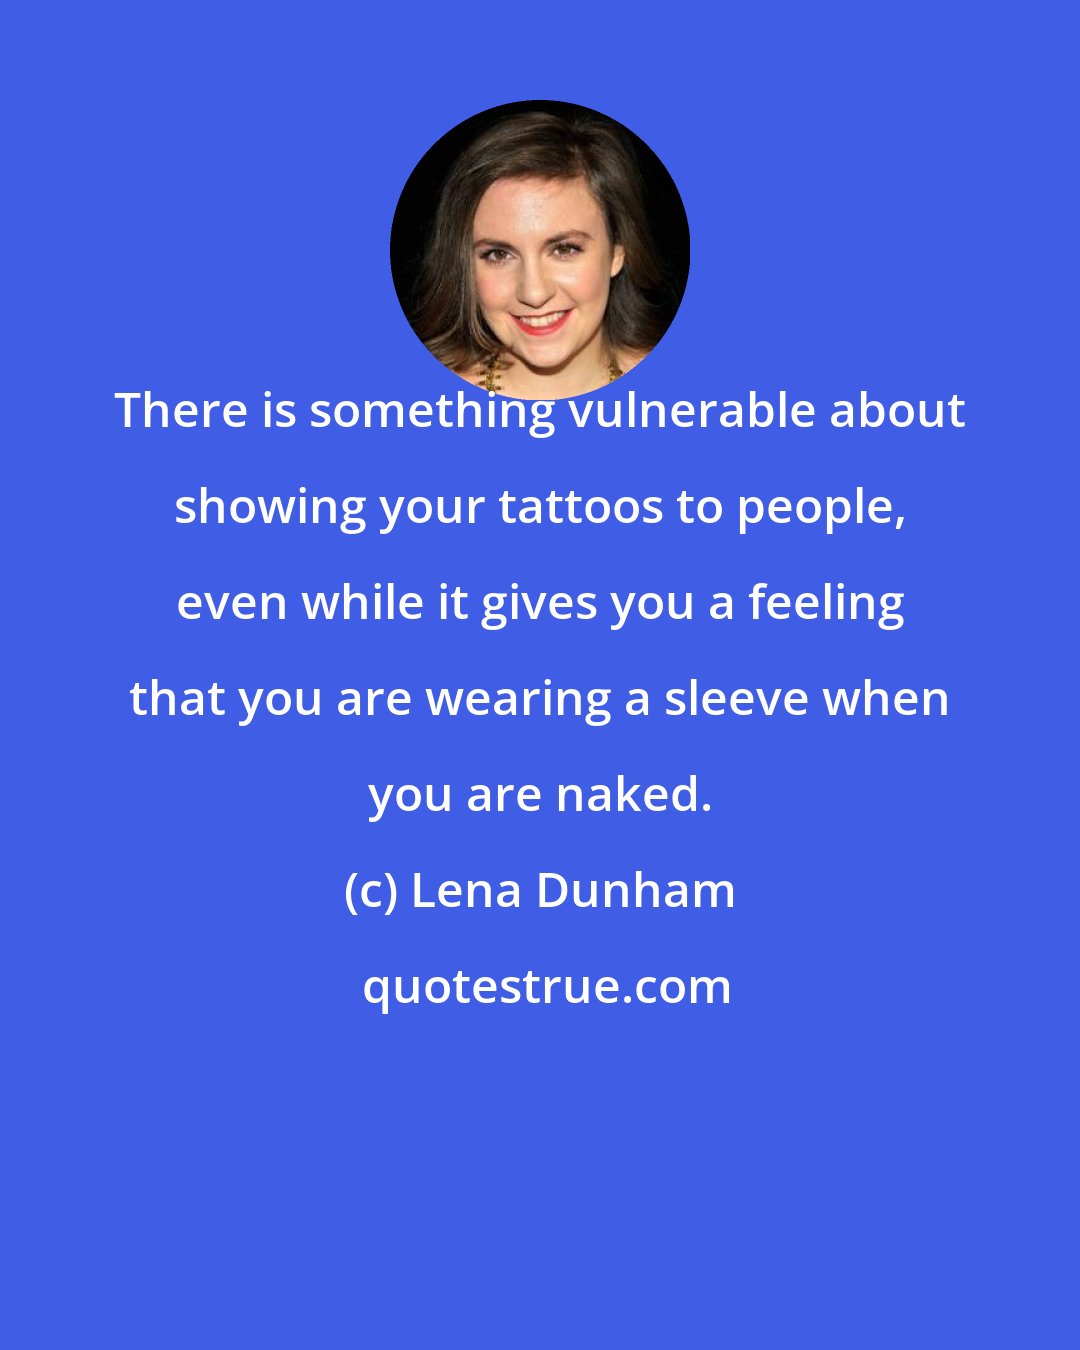 Lena Dunham: There is something vulnerable about showing your tattoos to people, even while it gives you a feeling that you are wearing a sleeve when you are naked.